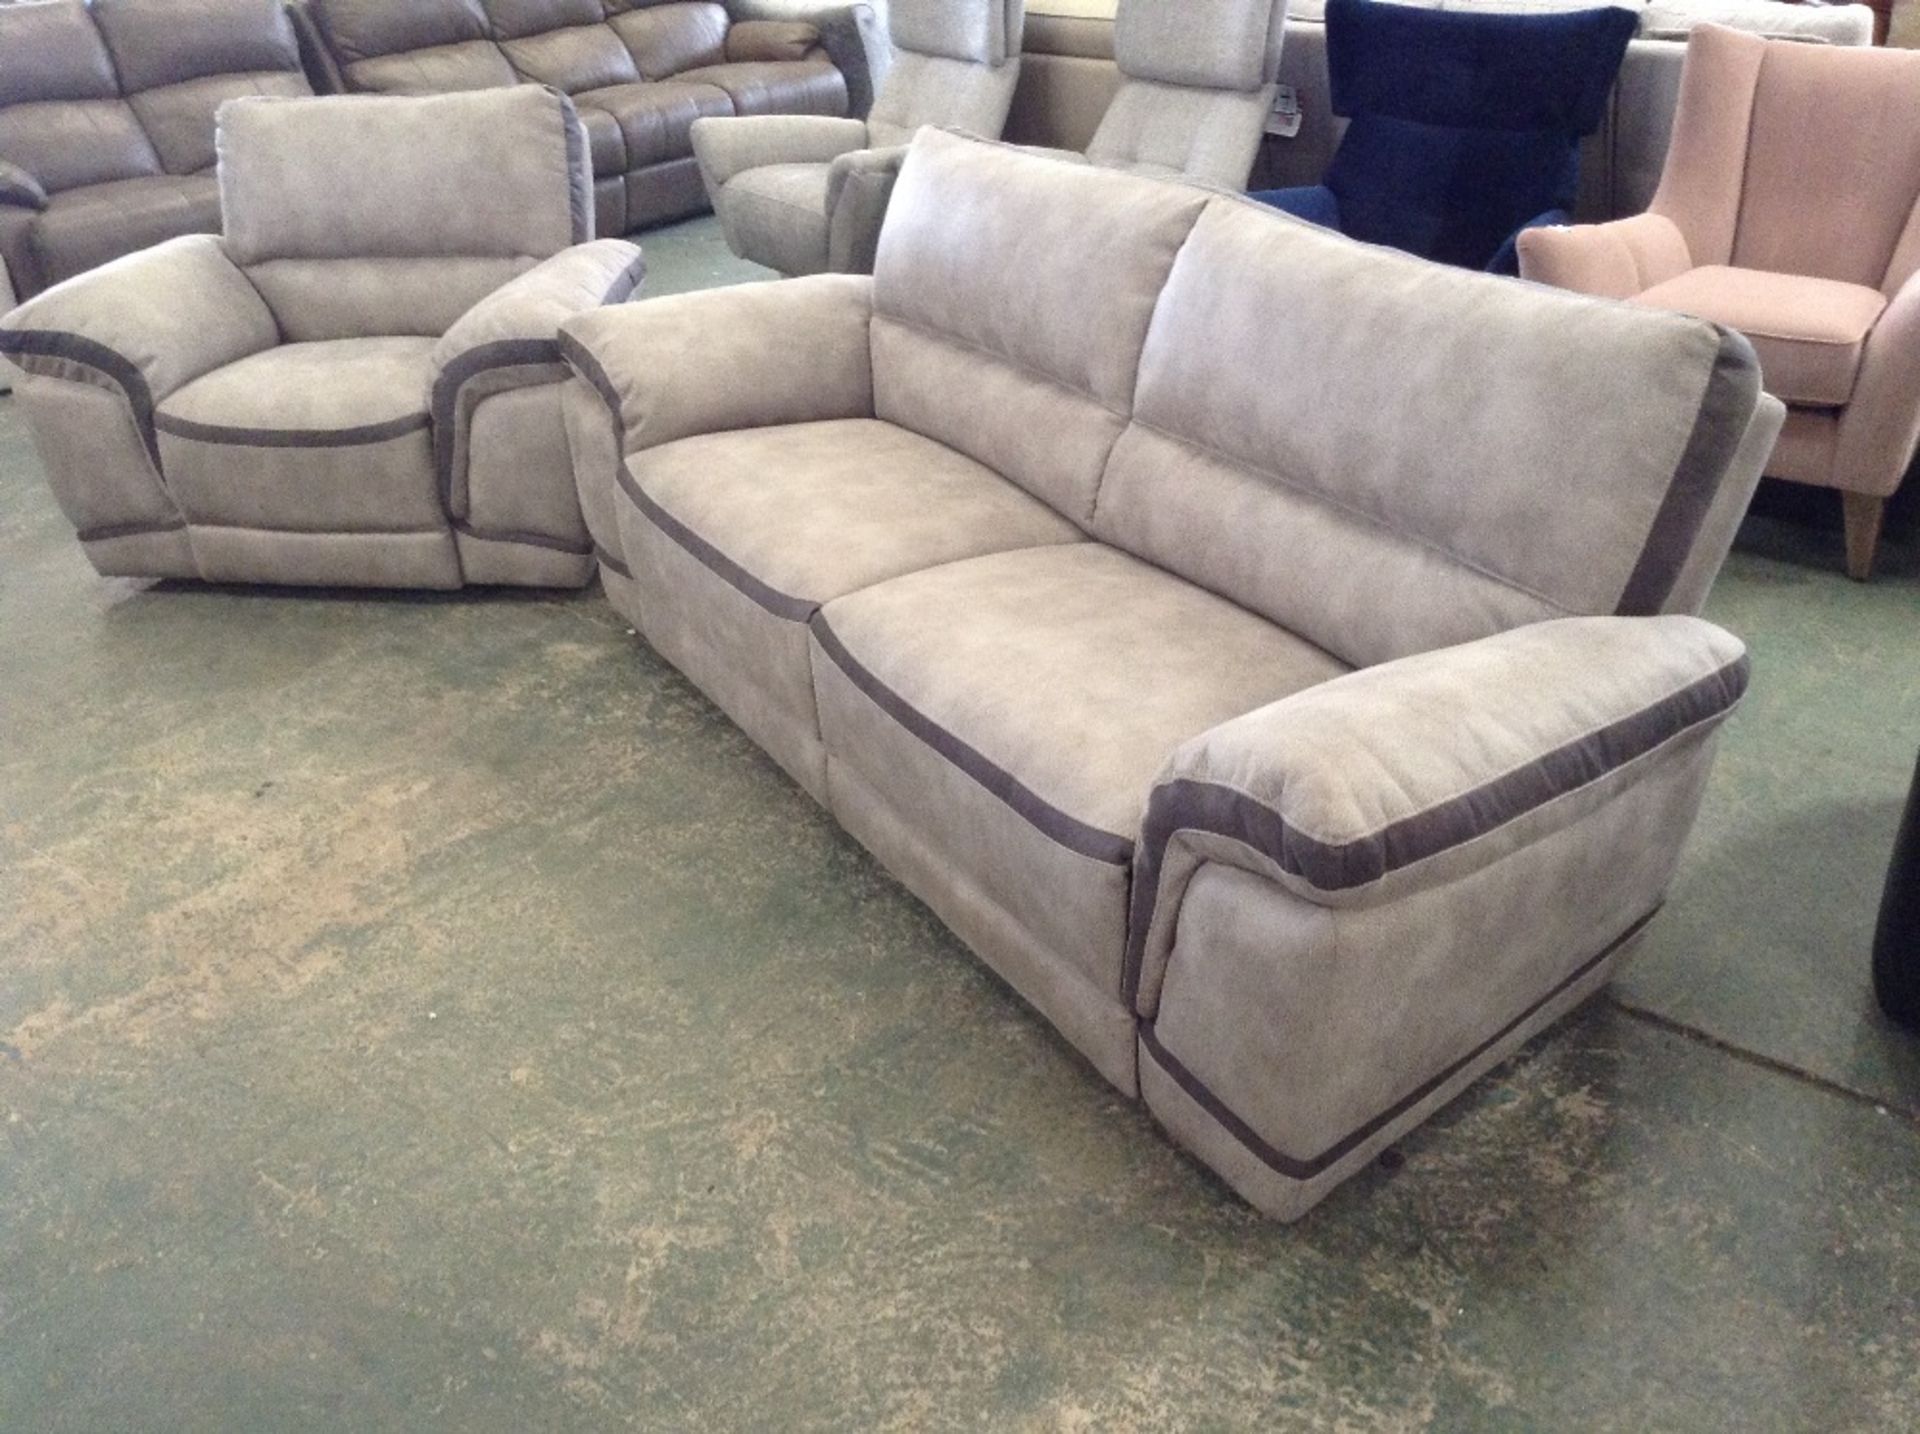 BEIGE AND BROWN 3 SEATER SOFA AND ELECTRIC RECLINI